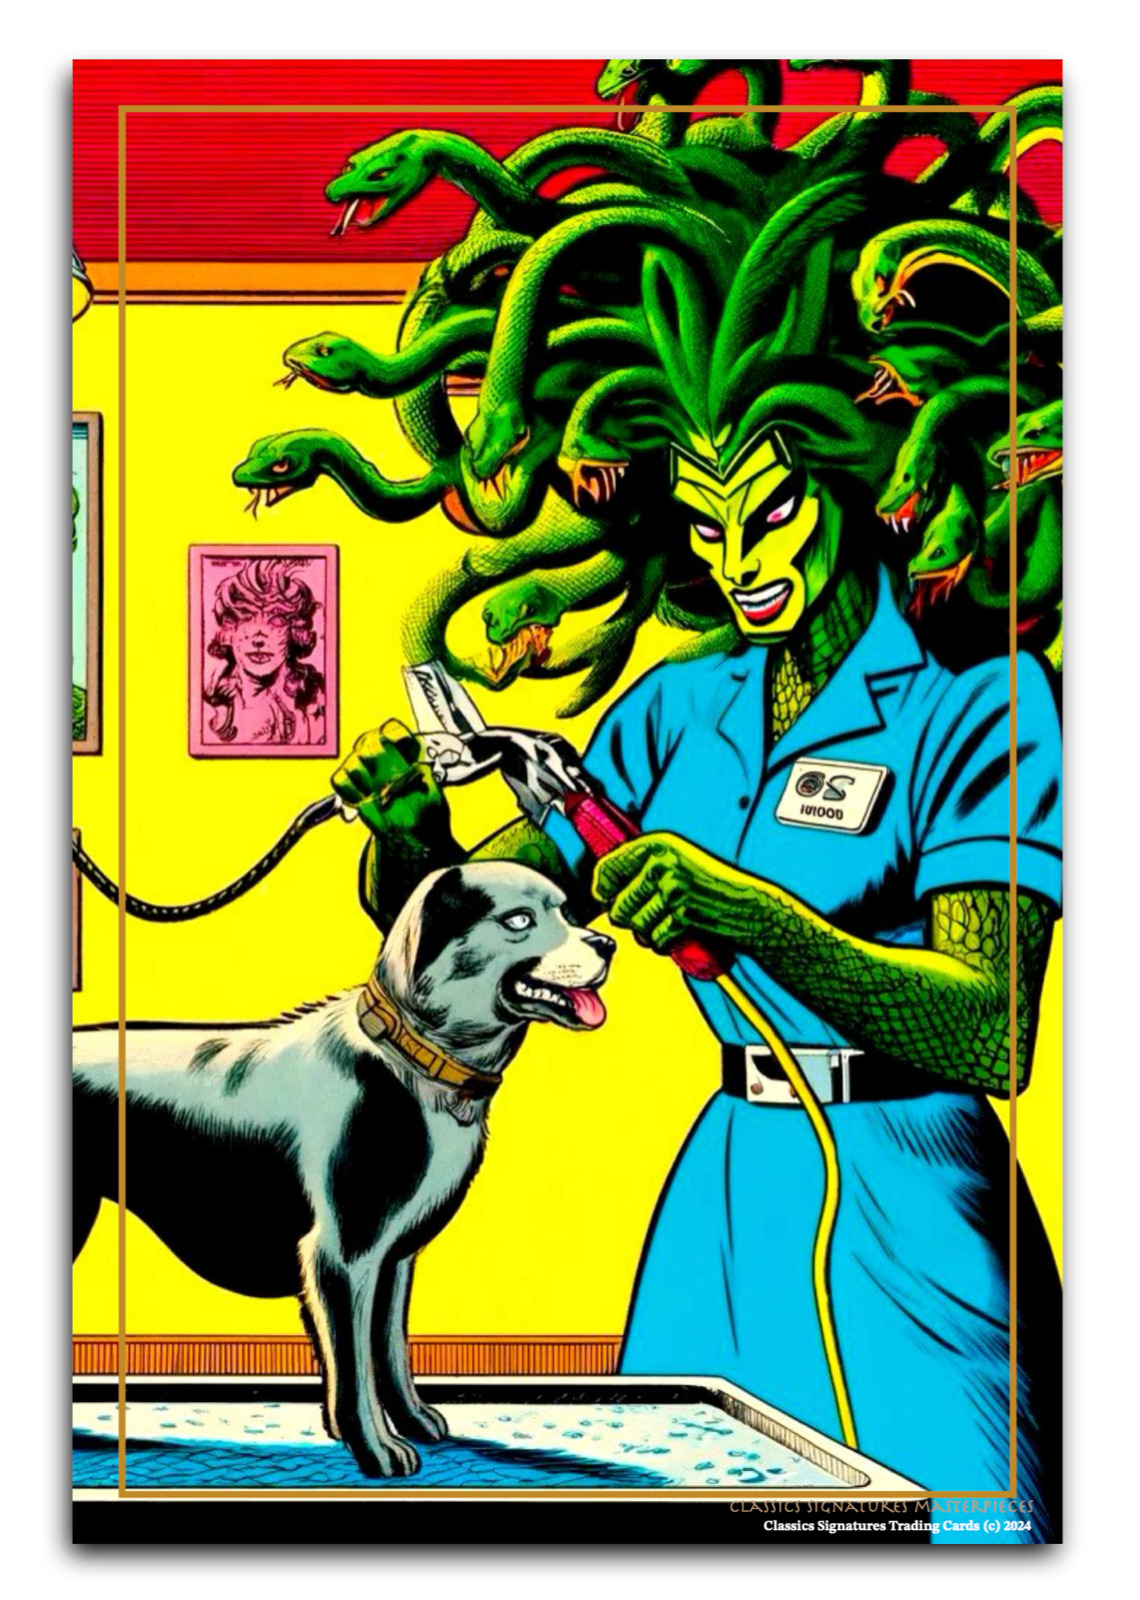 MASTERPIECES COLLECTION ART CARDS CLASSICS SIGNATURES MEDUSA'S DOG GROOMING ACEO